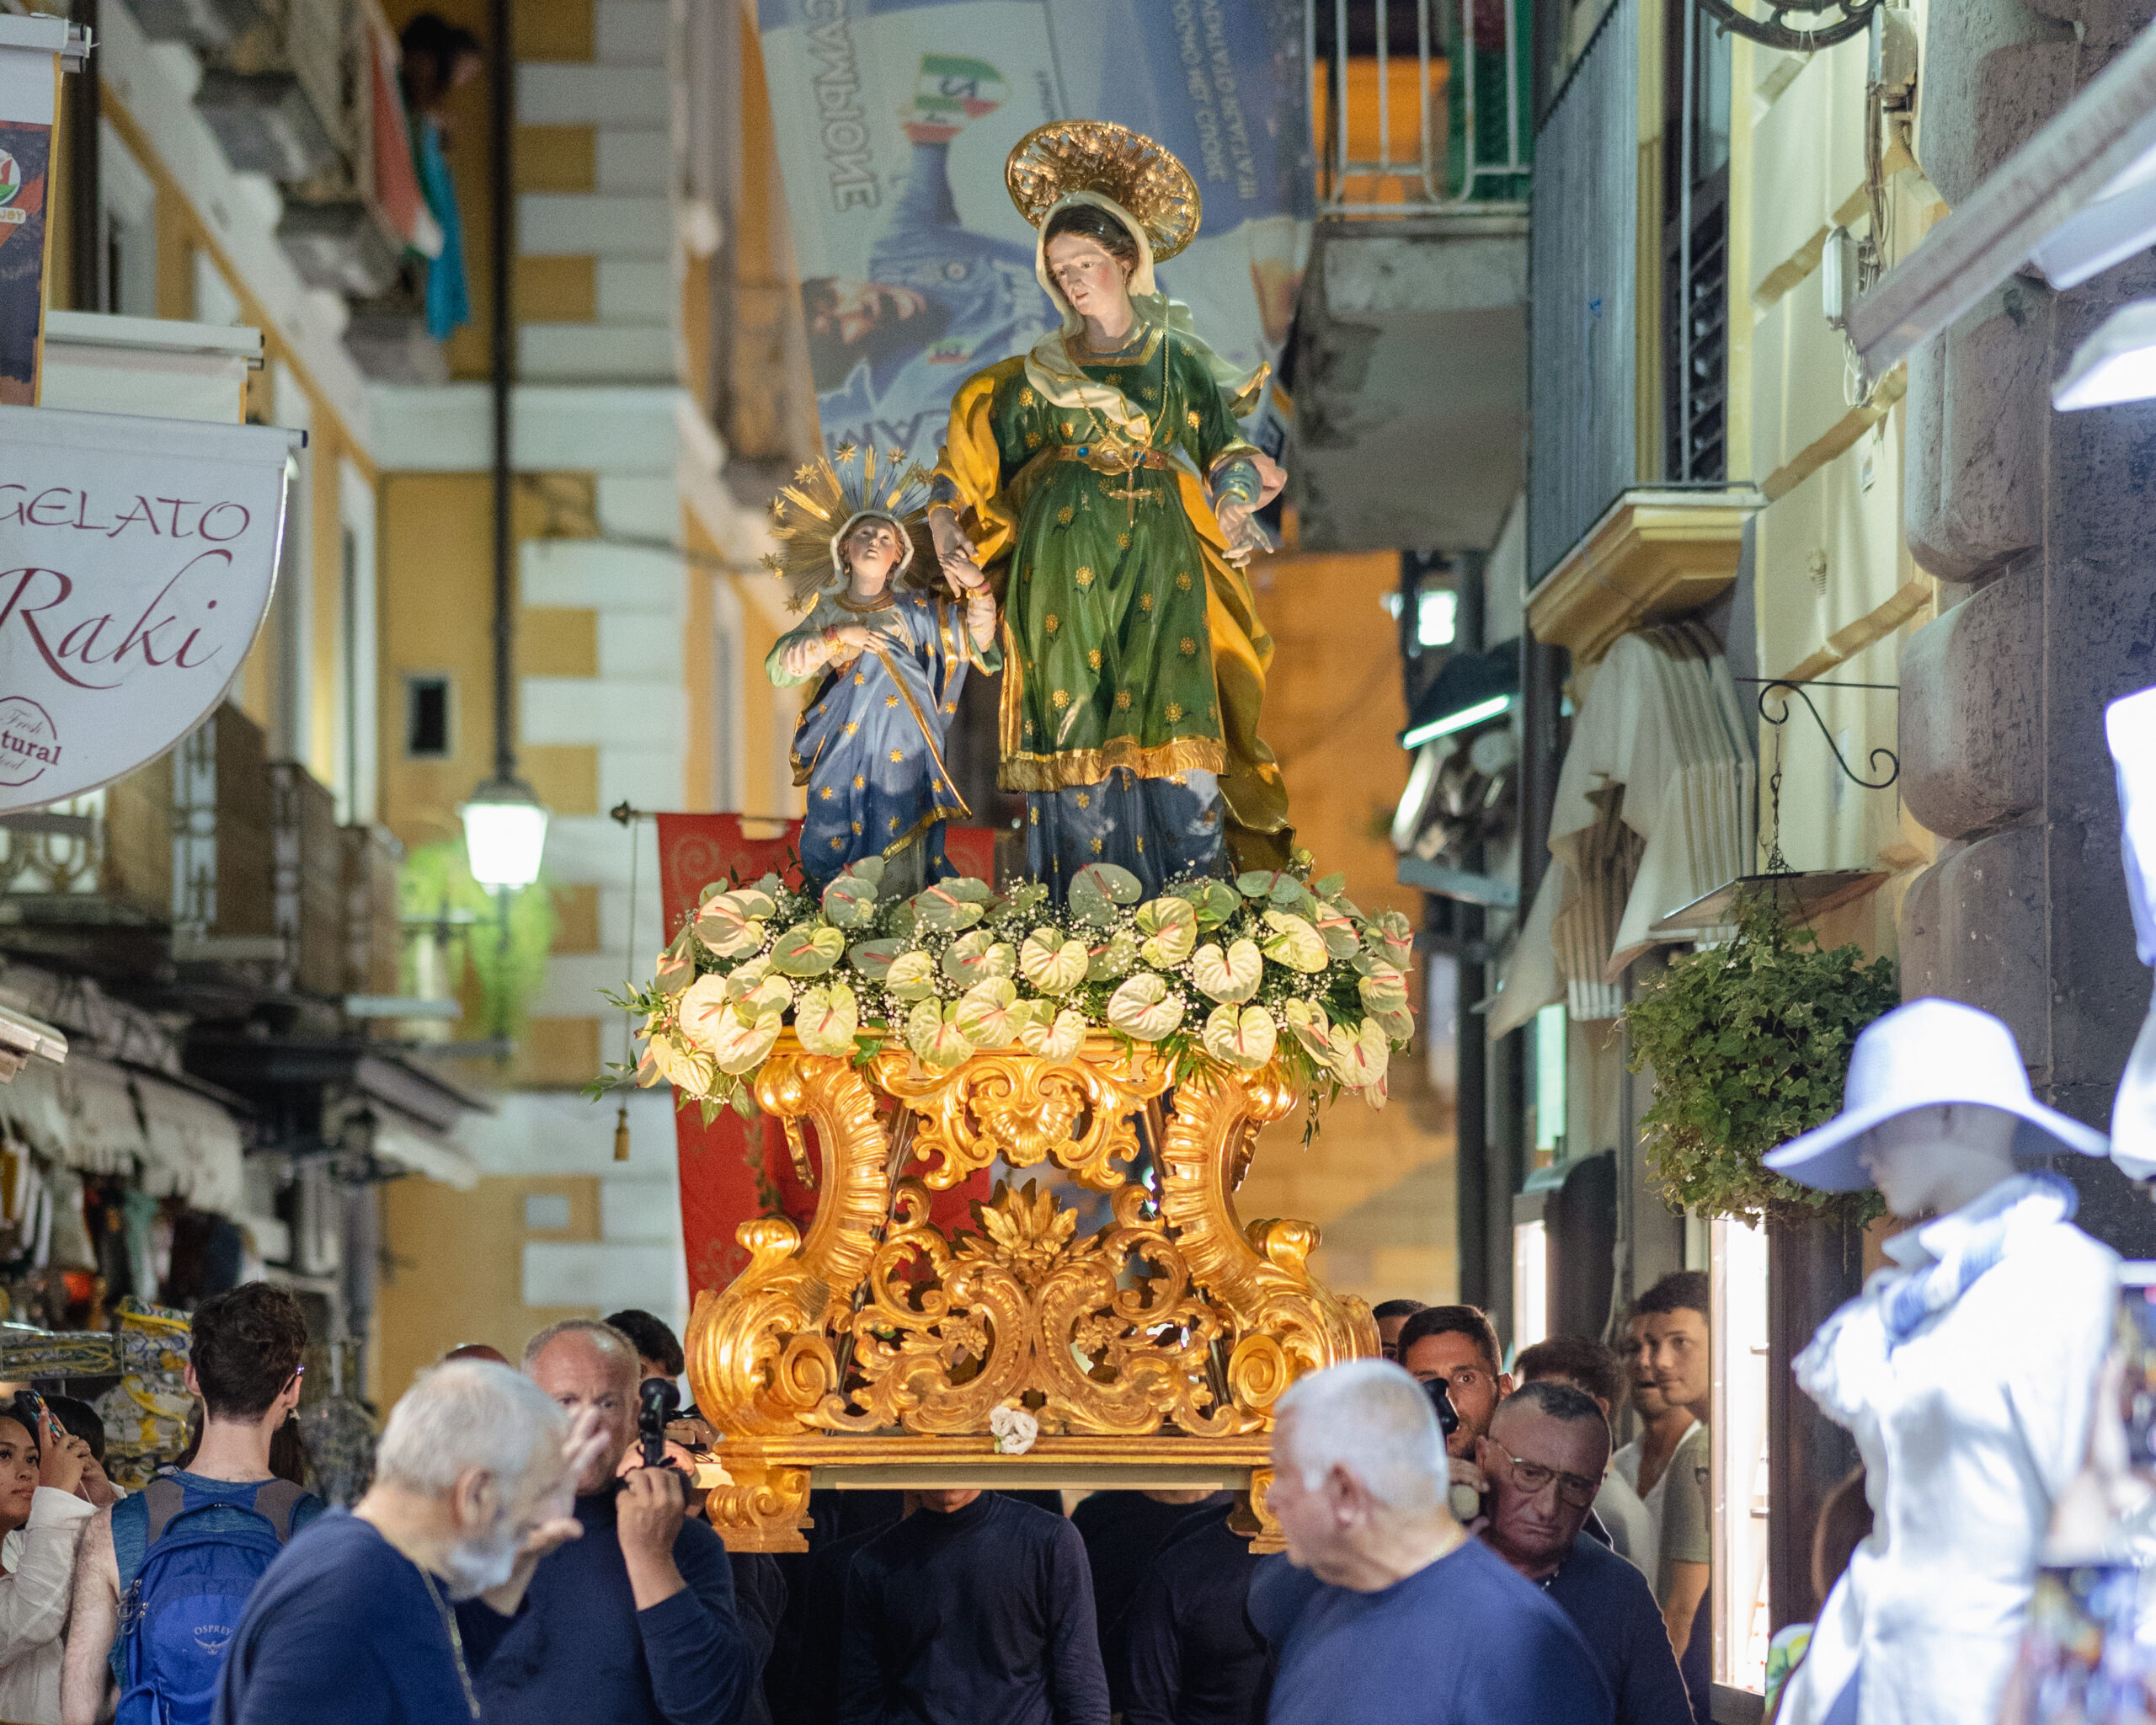 Sant'Anna Feast in Marina Grande: A Celebration of Tradition and Culture